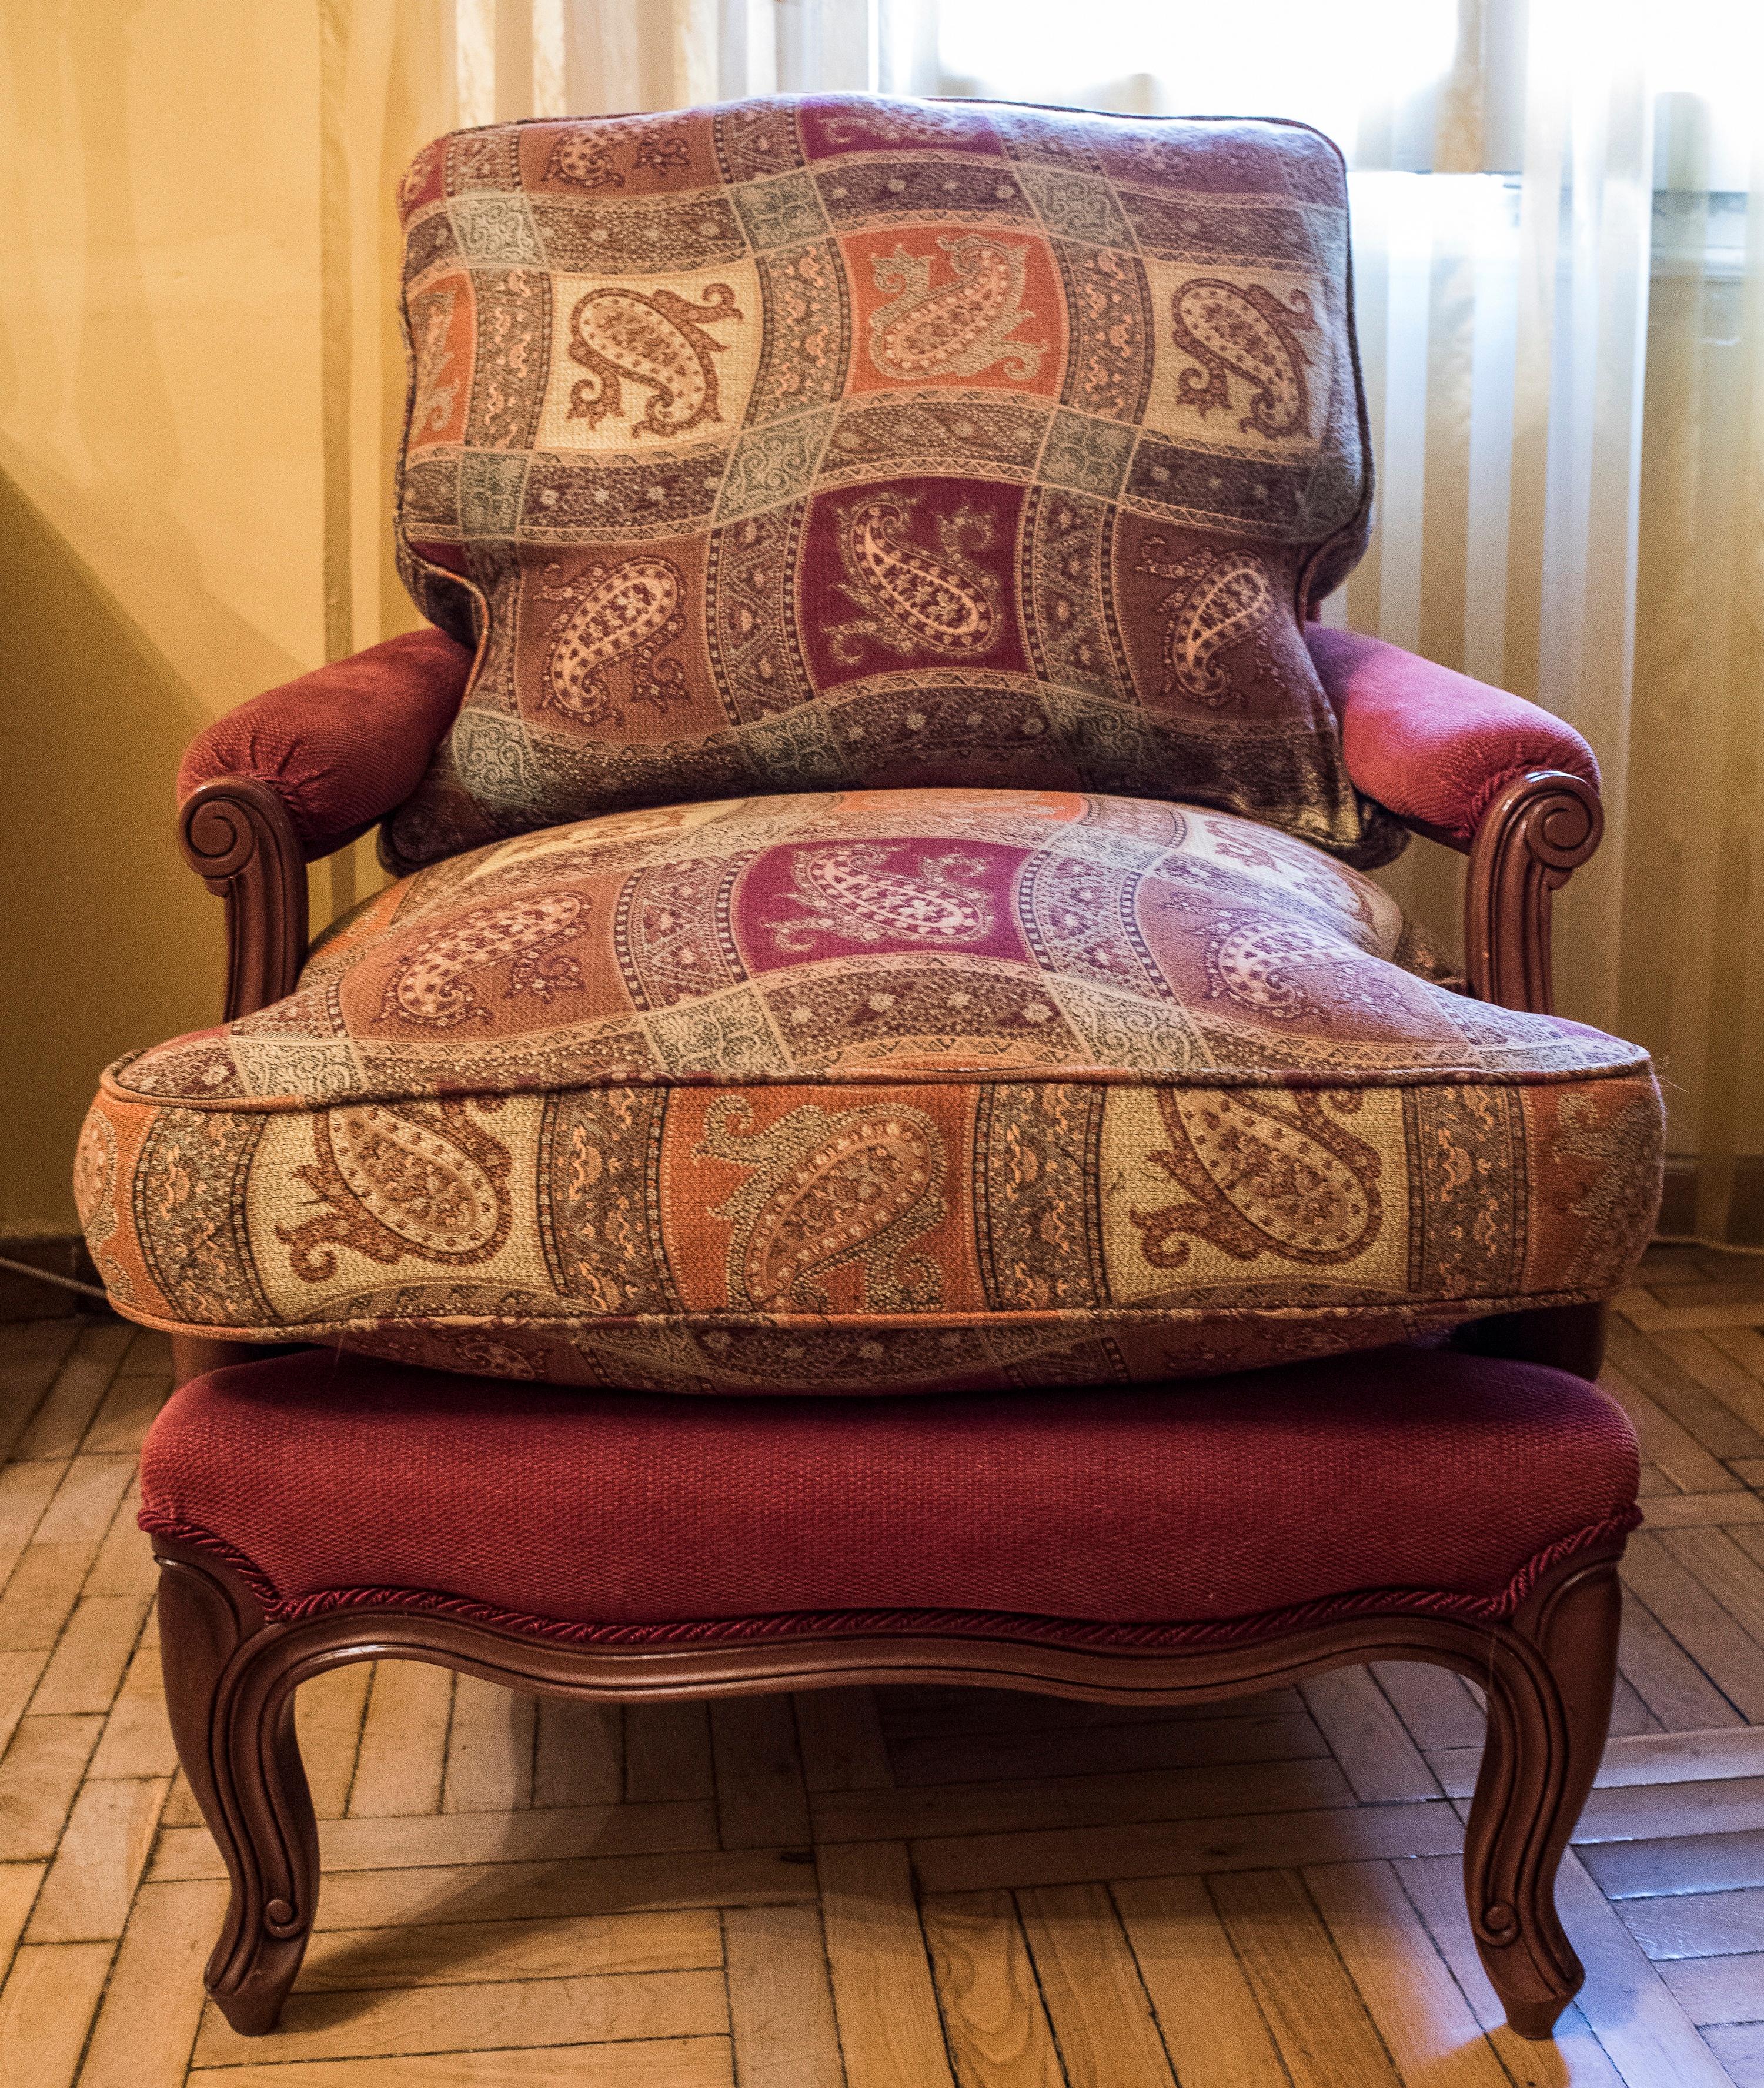 A stunning couple of walnut Luis XV style French armchairs. In a new condition, uplostered with pink ottoman fabric and paisley design. Beautiful and comfortable, they give un touch of timeless elegance to anywhere.